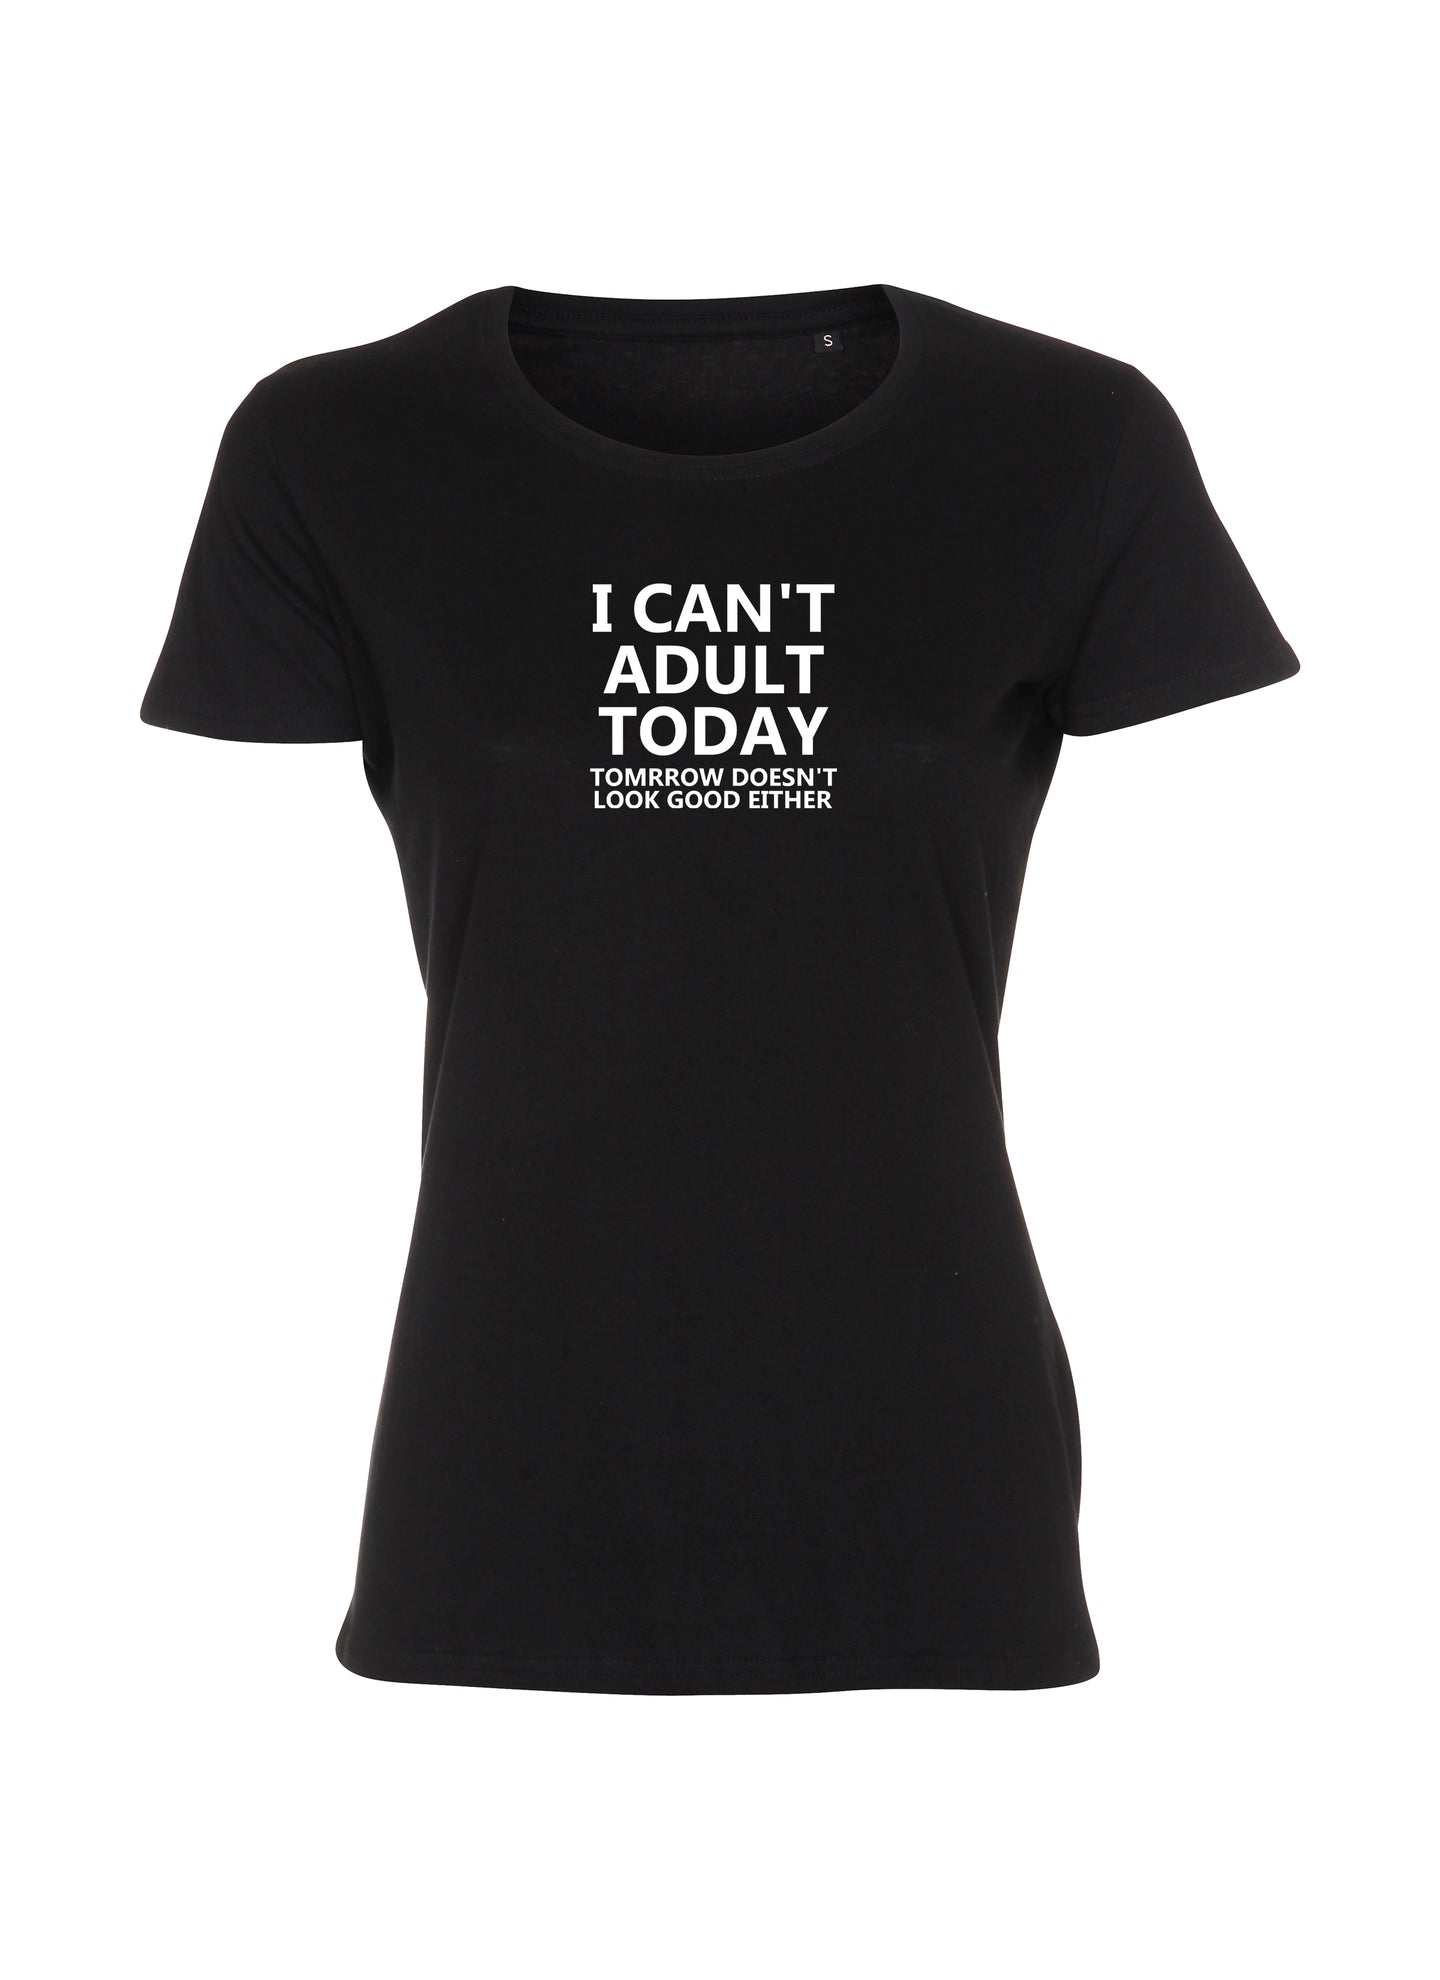 I can't adult today, Tomorrow doesn't look good either (Lady t-shirt)